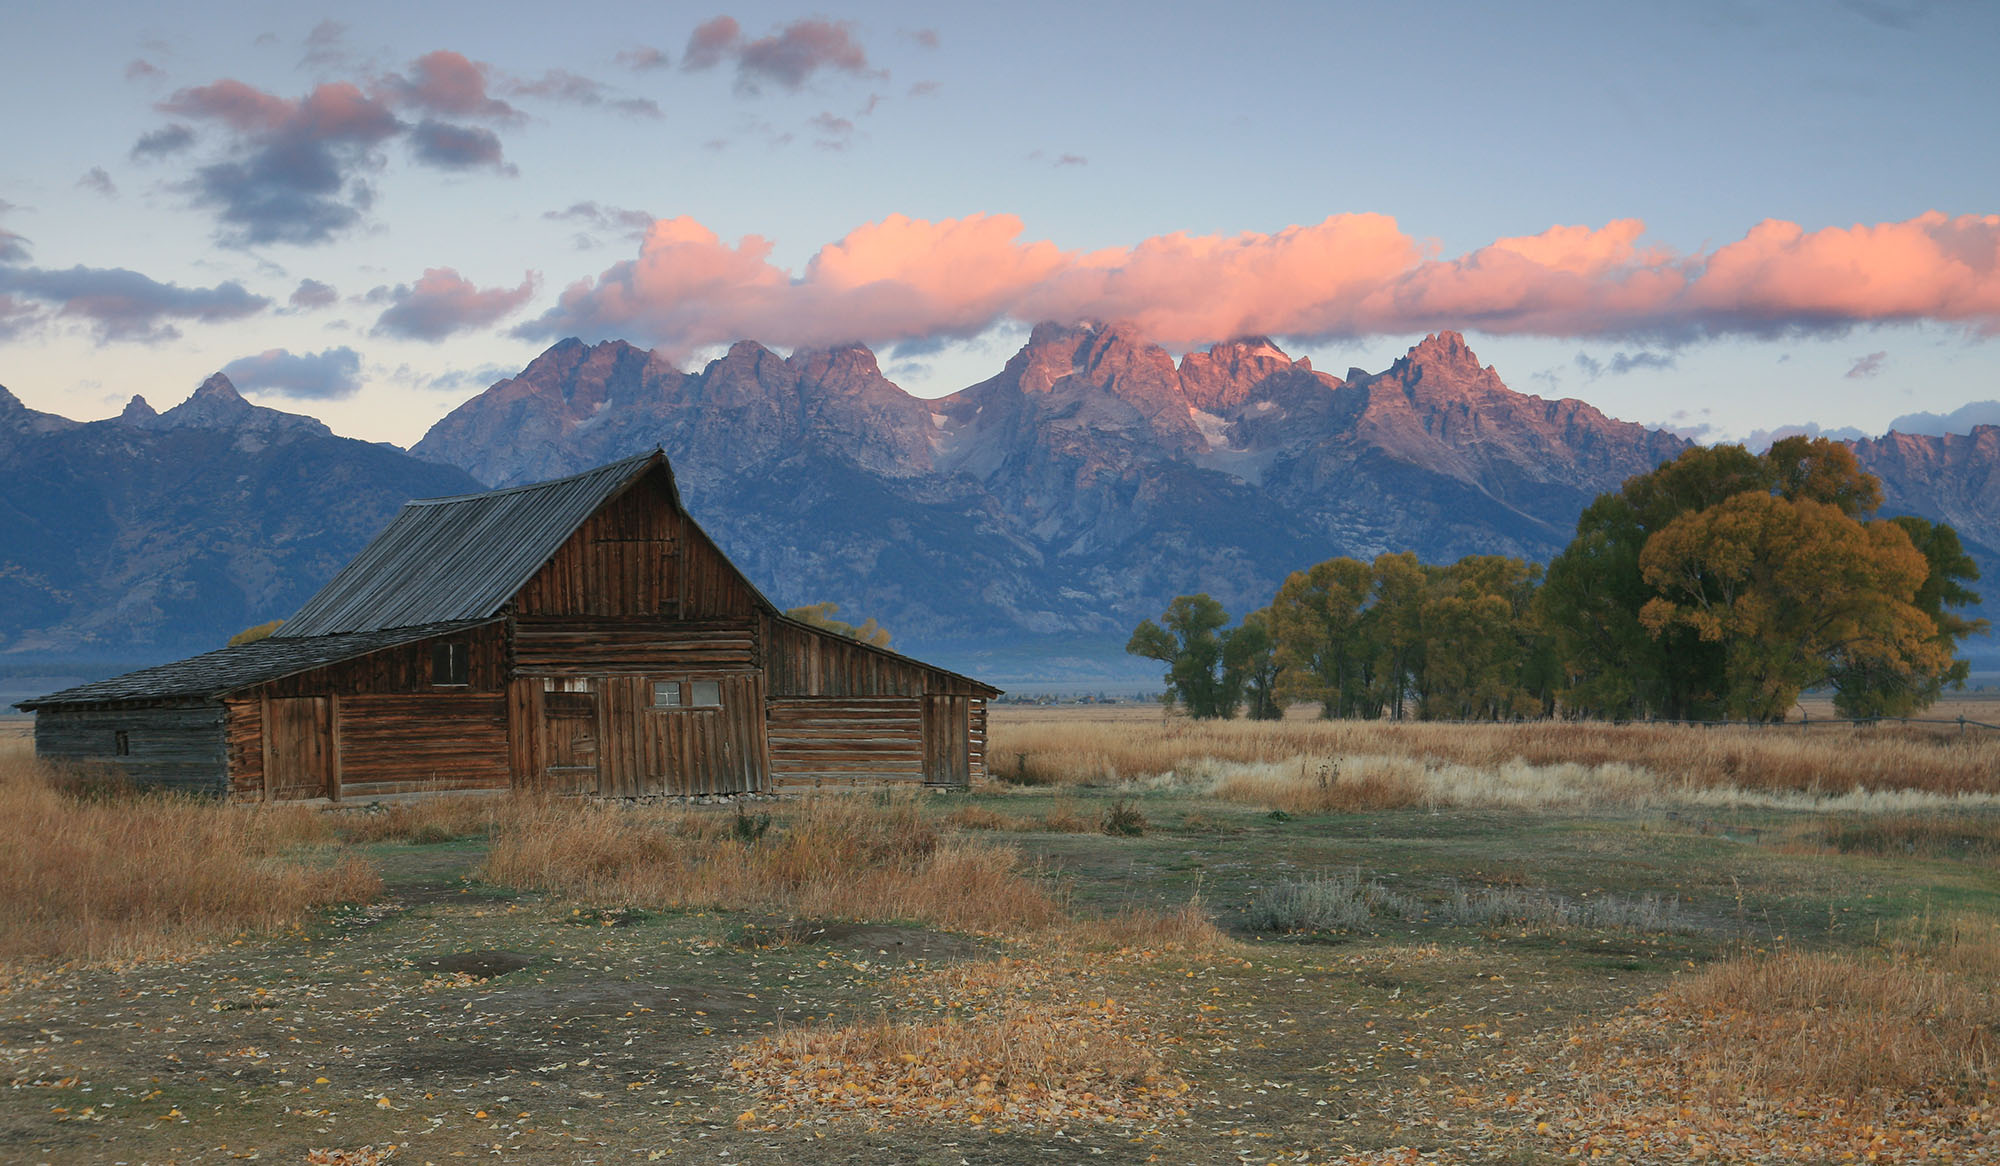 An old wood farmhouse in a valley in front of a mountain range.